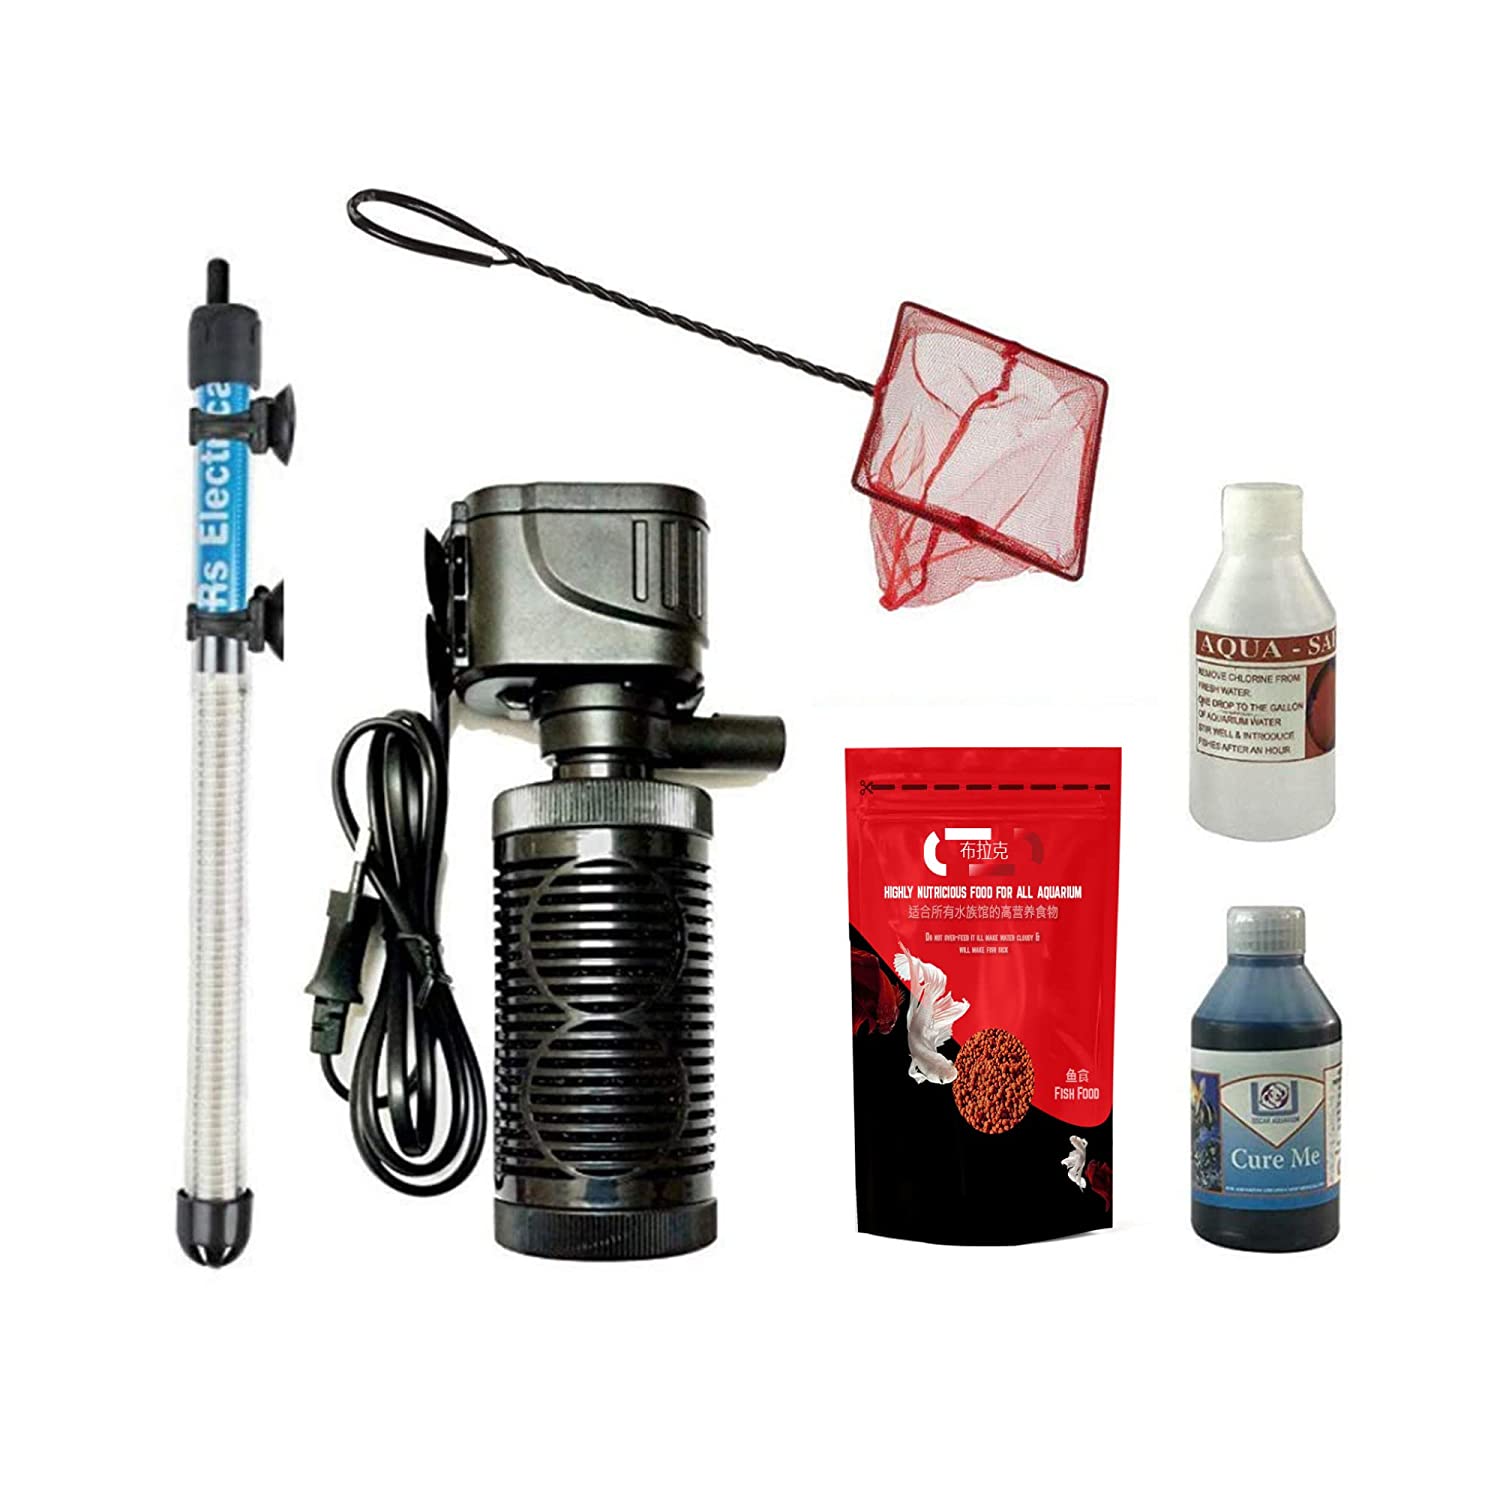 Filter air Pump Accessories Beginners Complete kit Internal Filter with 100 watt Fully Heater Fish Food net 6 1 Complete All Set for Fish Tank (6 in 1)